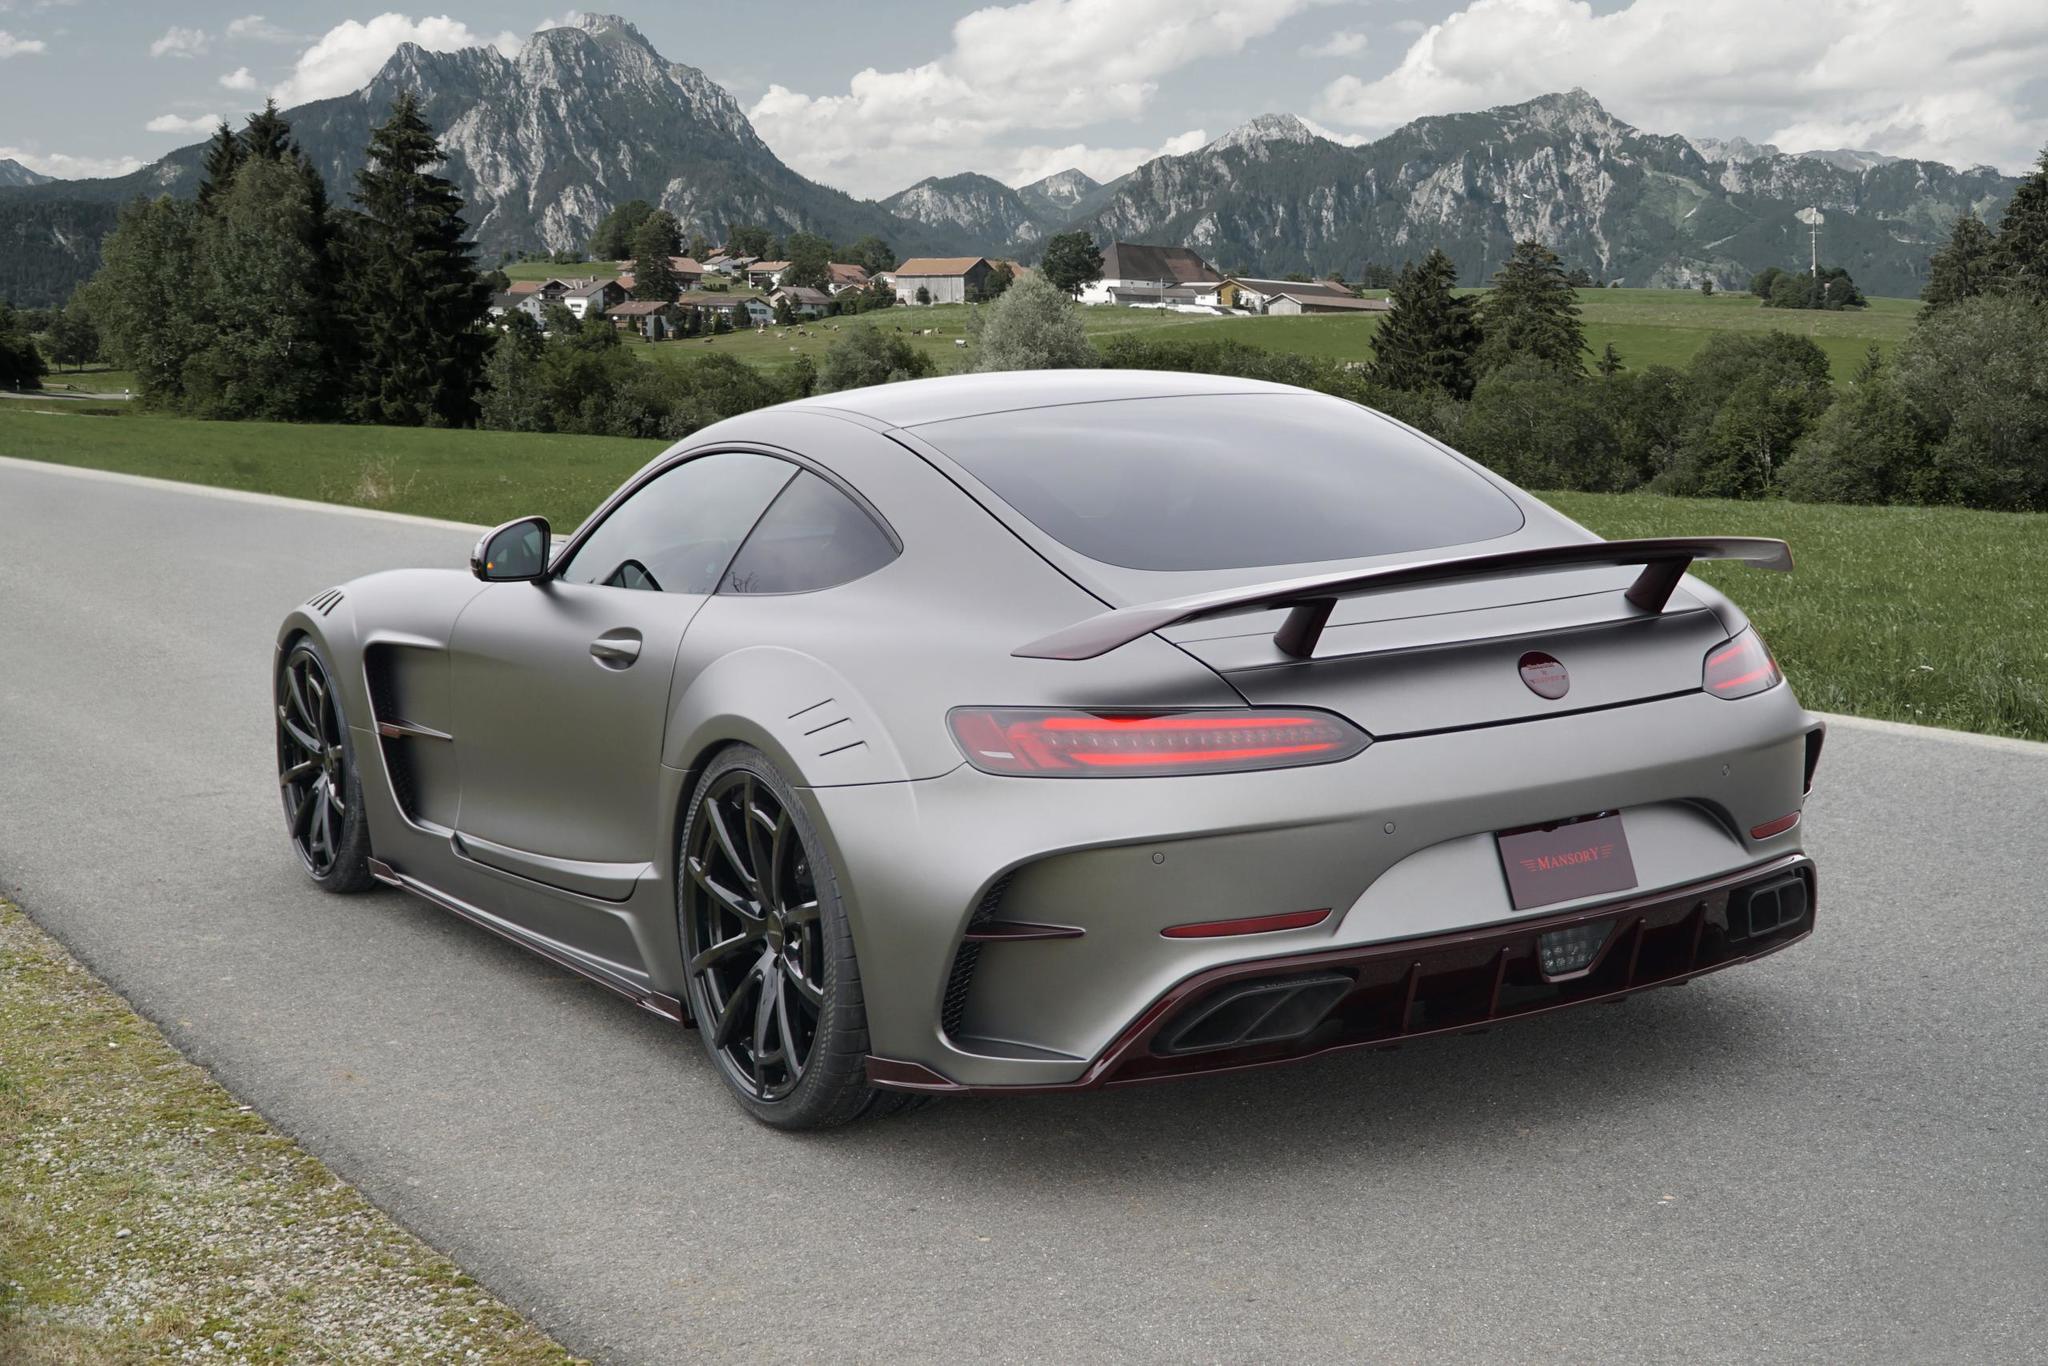 Mansory body kit for Mercedes-Benz AMG GT  latest model